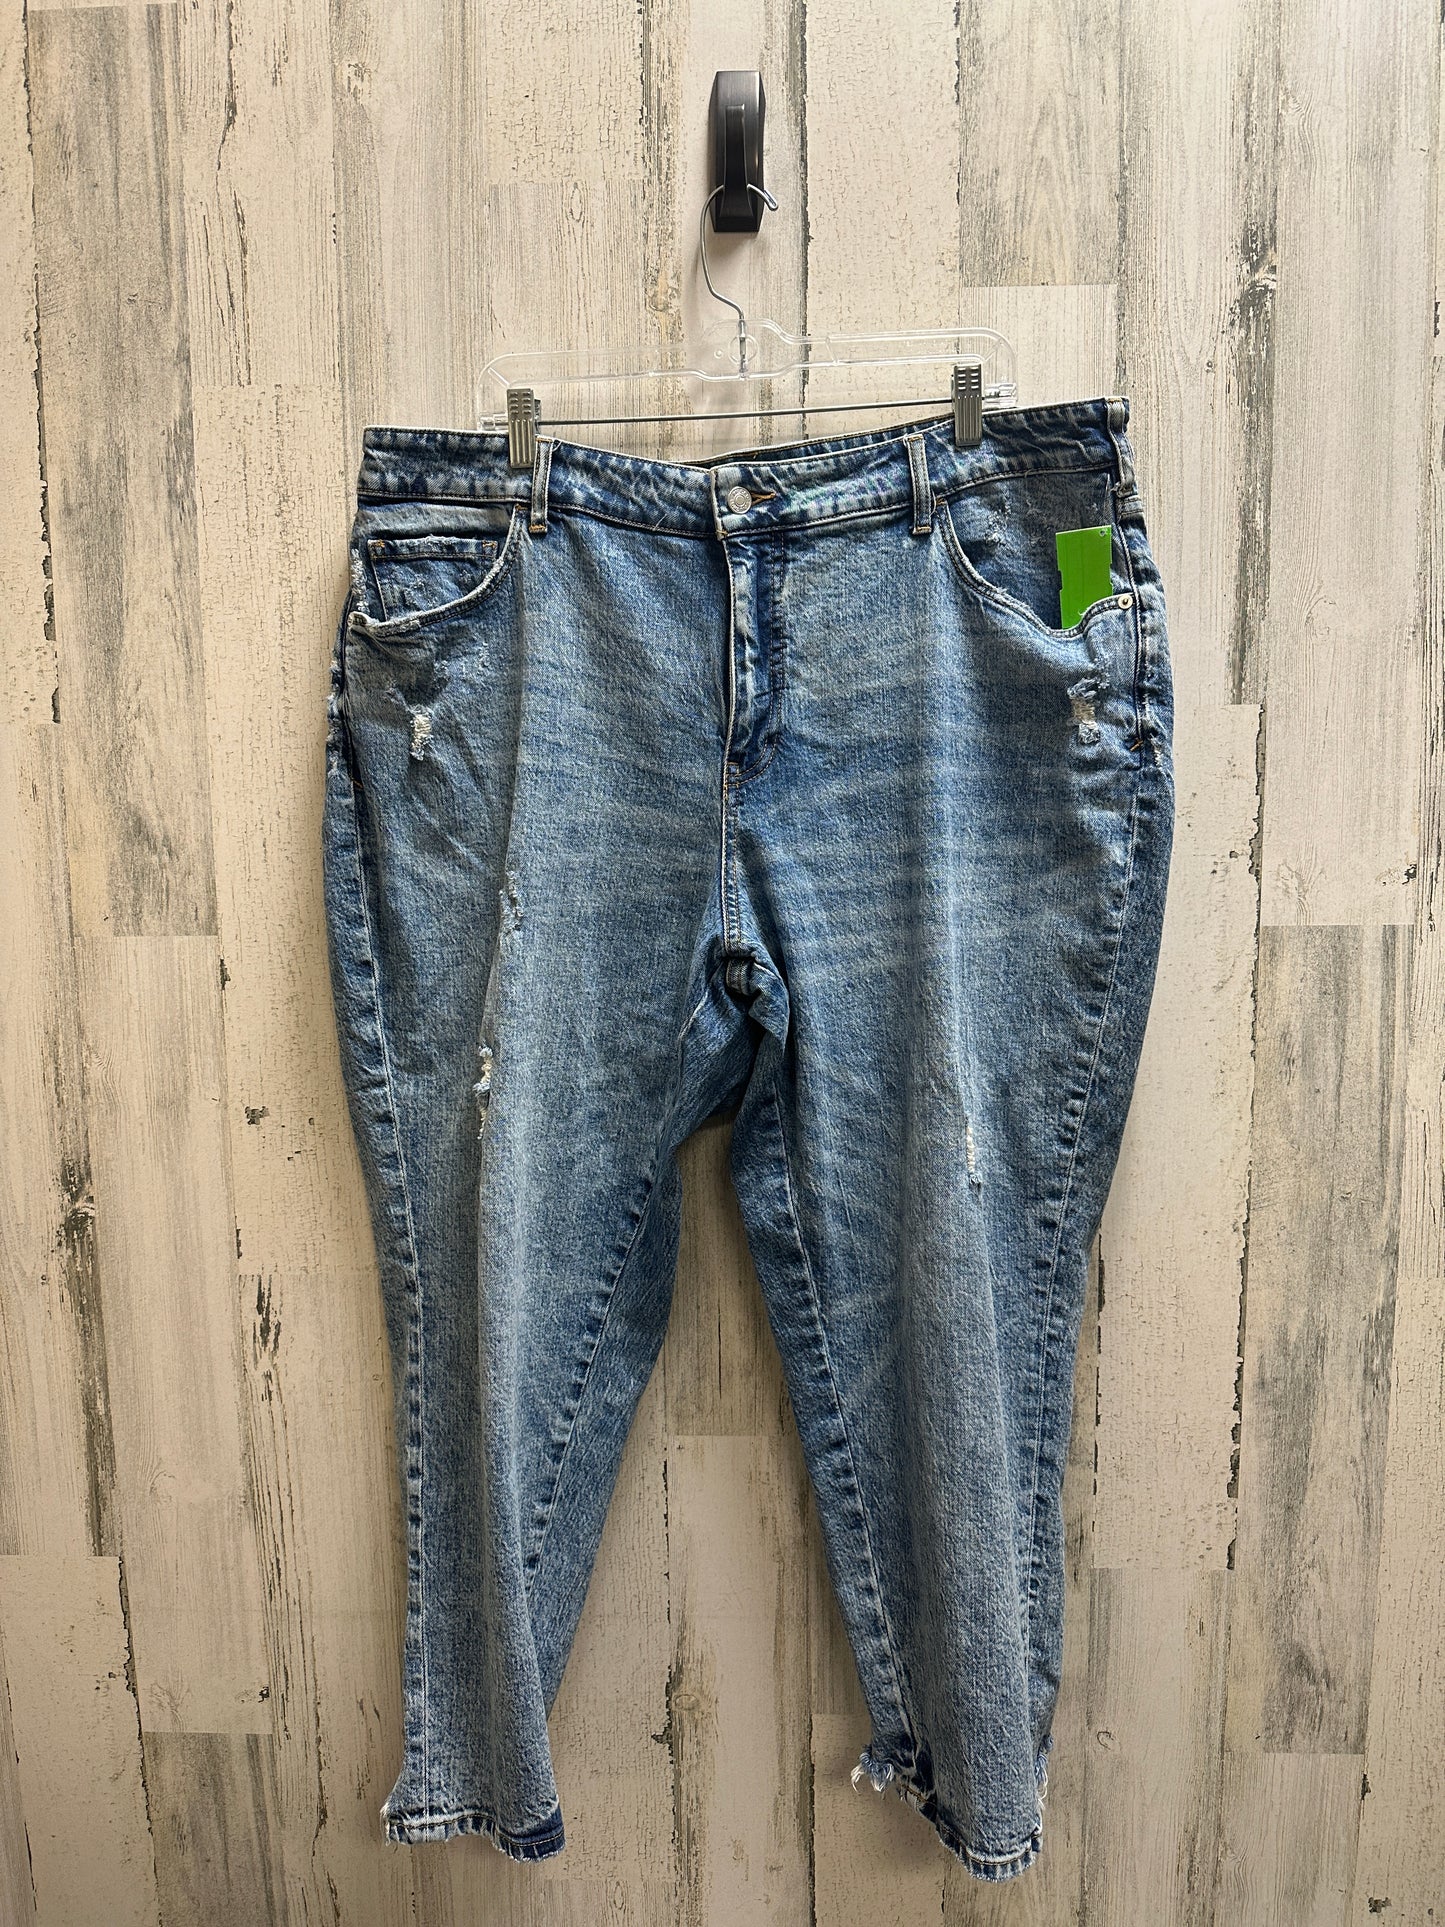 Jeans Relaxed/boyfriend By Anthropologie  Size: 18